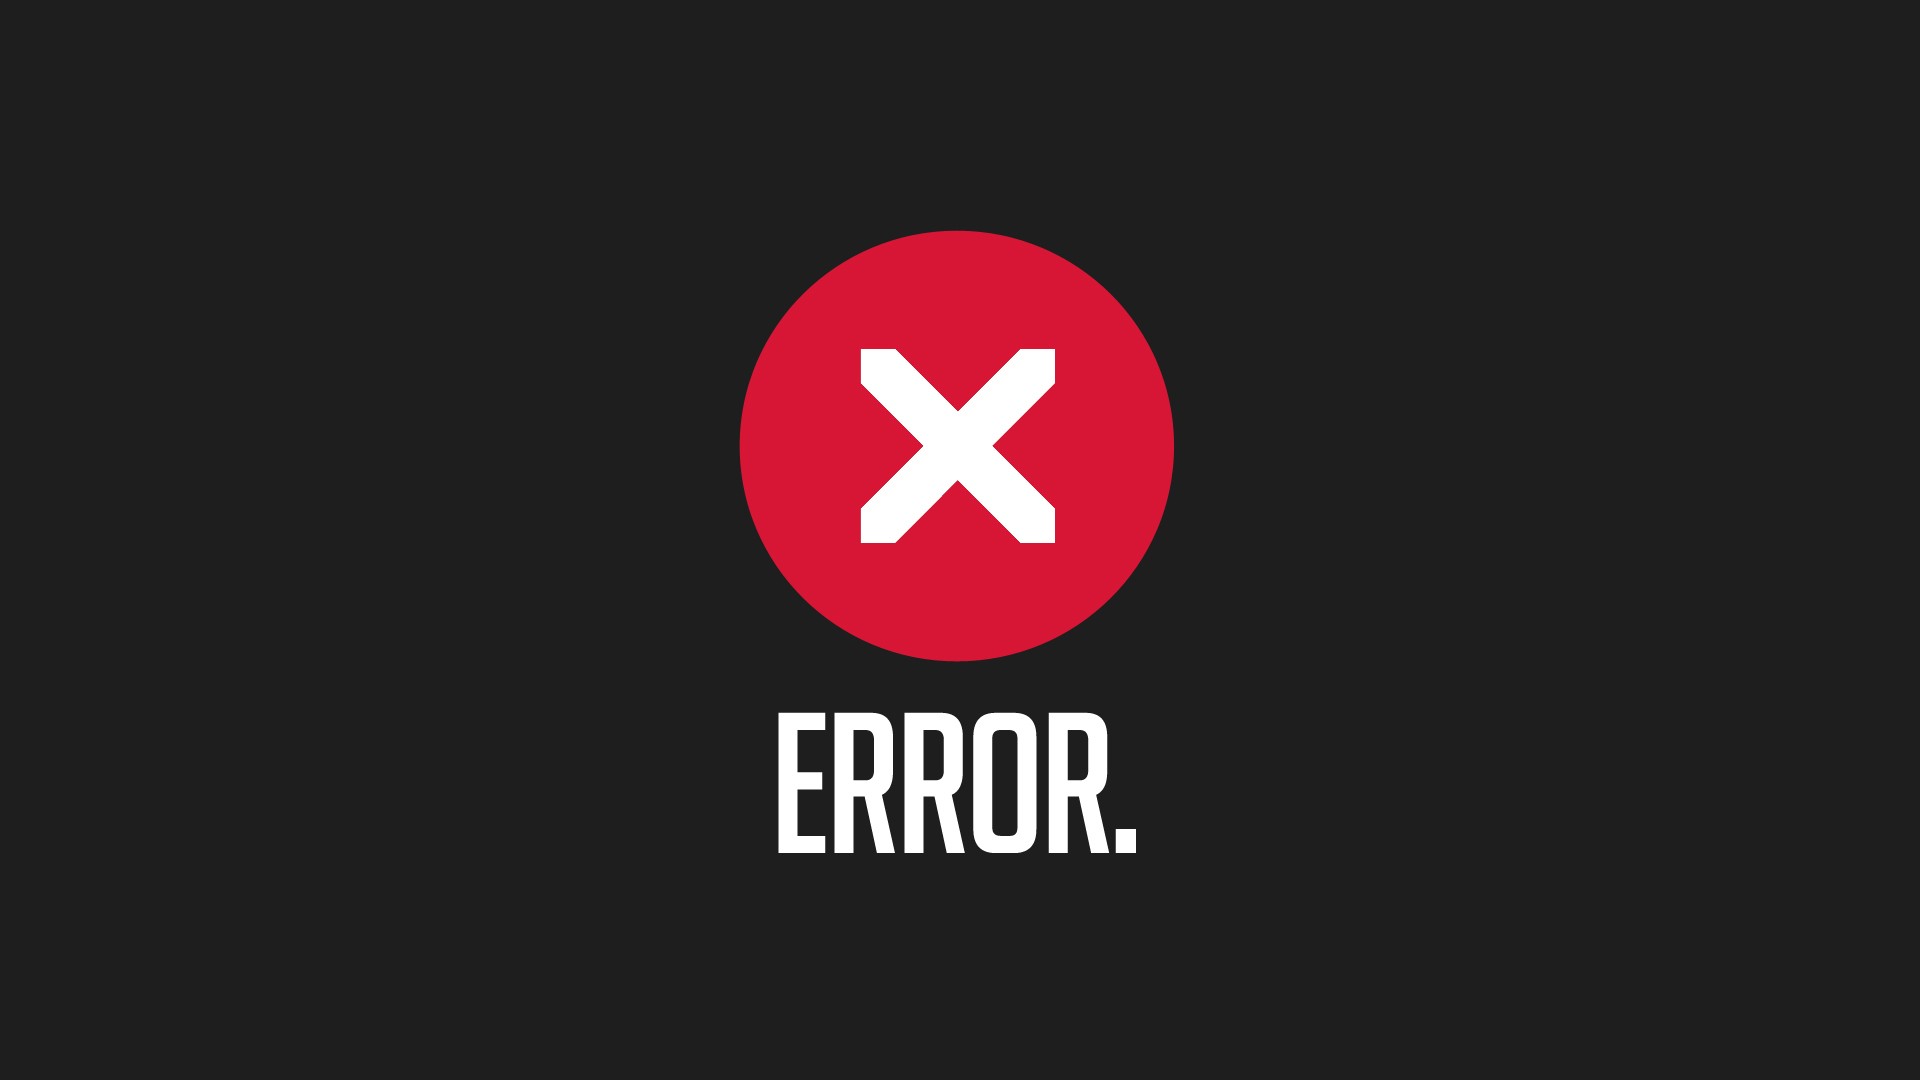 Task Sequence Failed With The Error Code